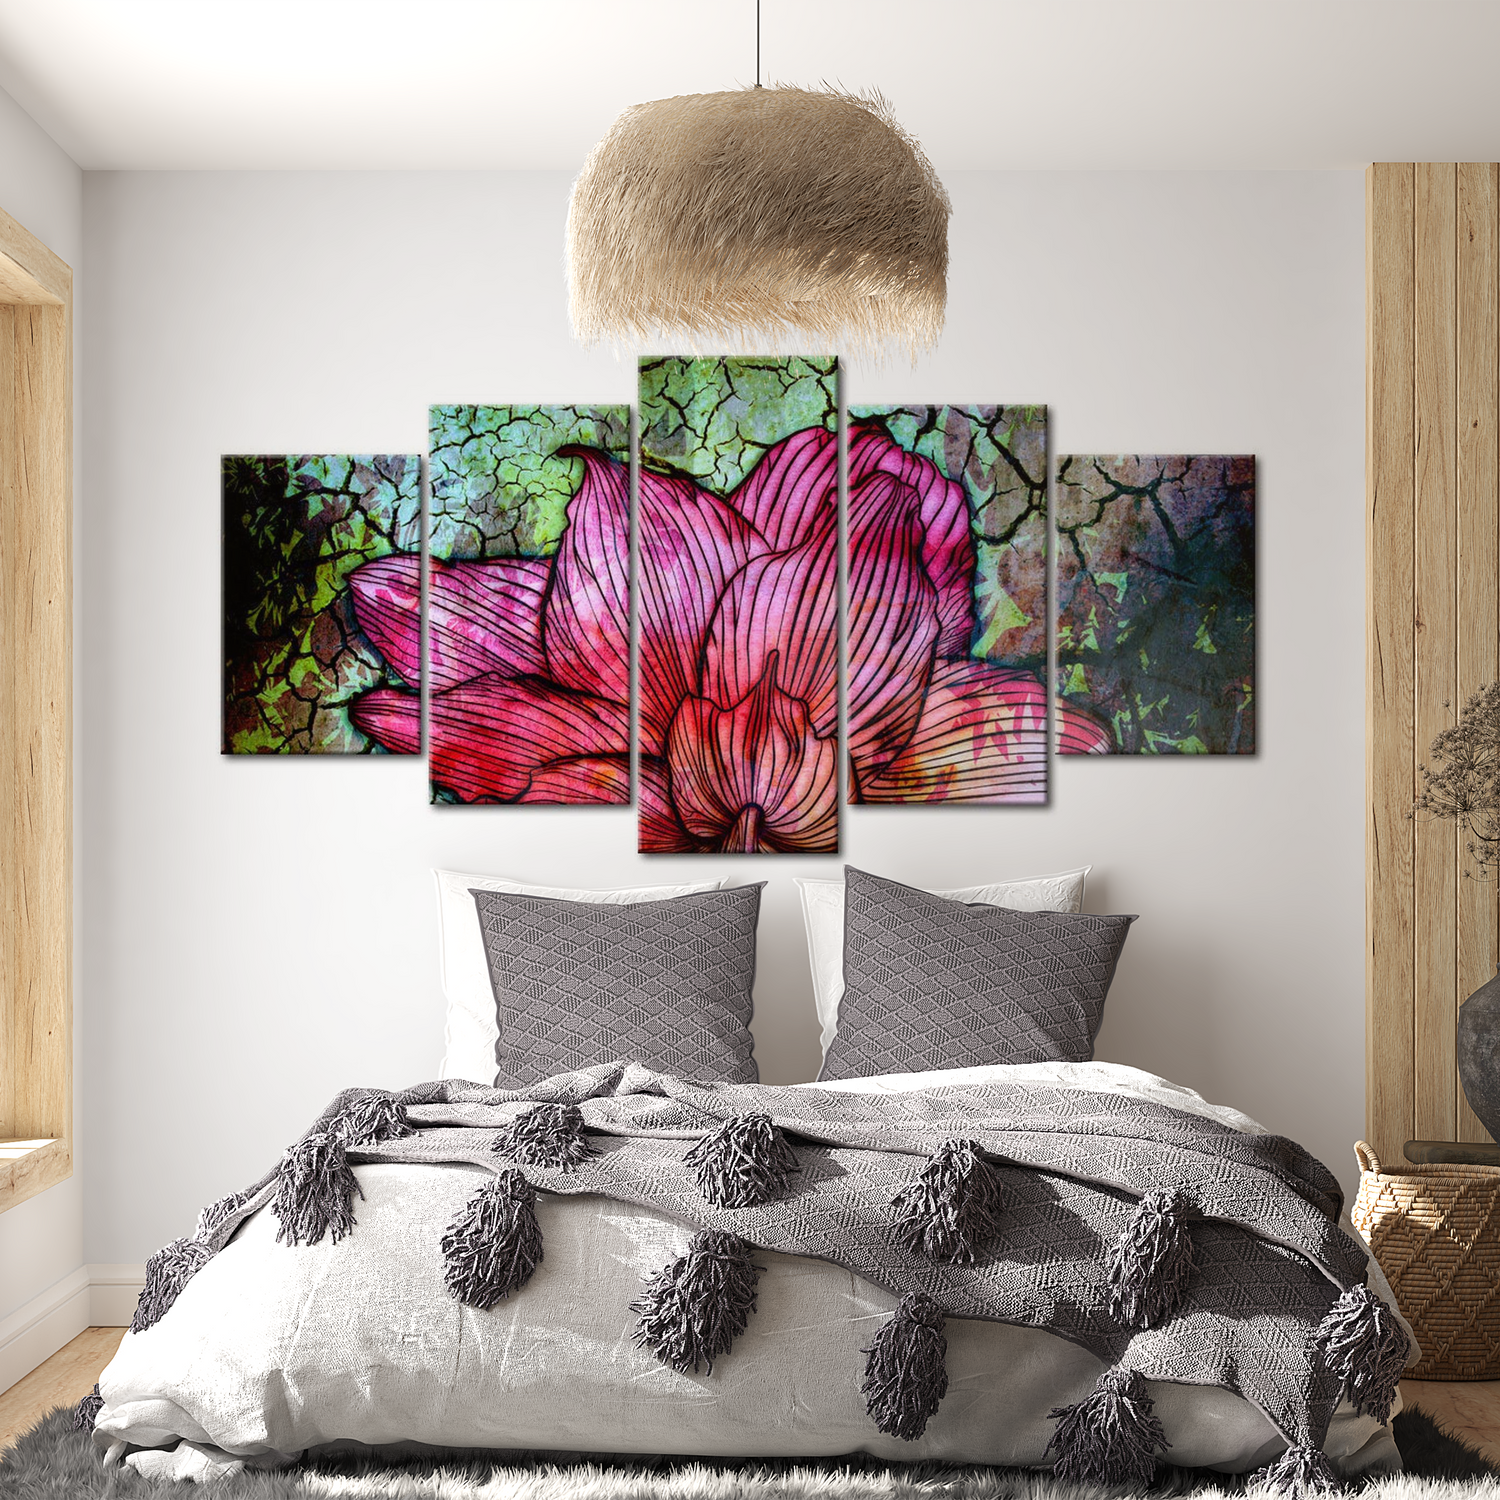 Stretched Canvas Floral Art - Flowery Stained Glass 40"Wx20"H